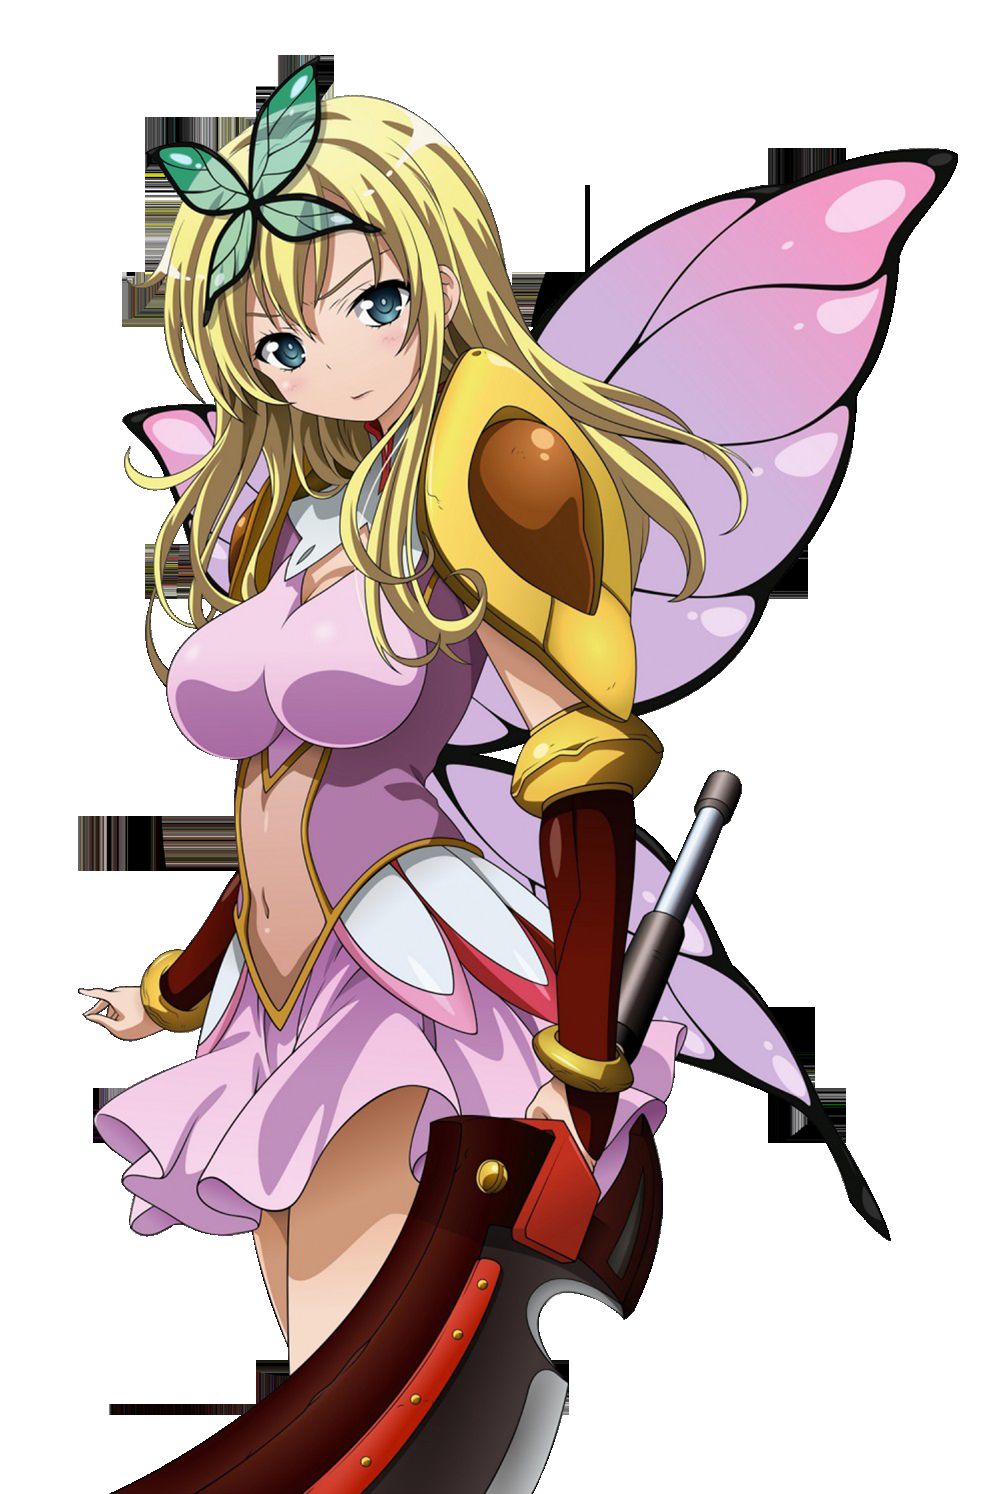 [Erocola Character Material] PNG background transparent erotic image material, such as anime characters Part 263 25